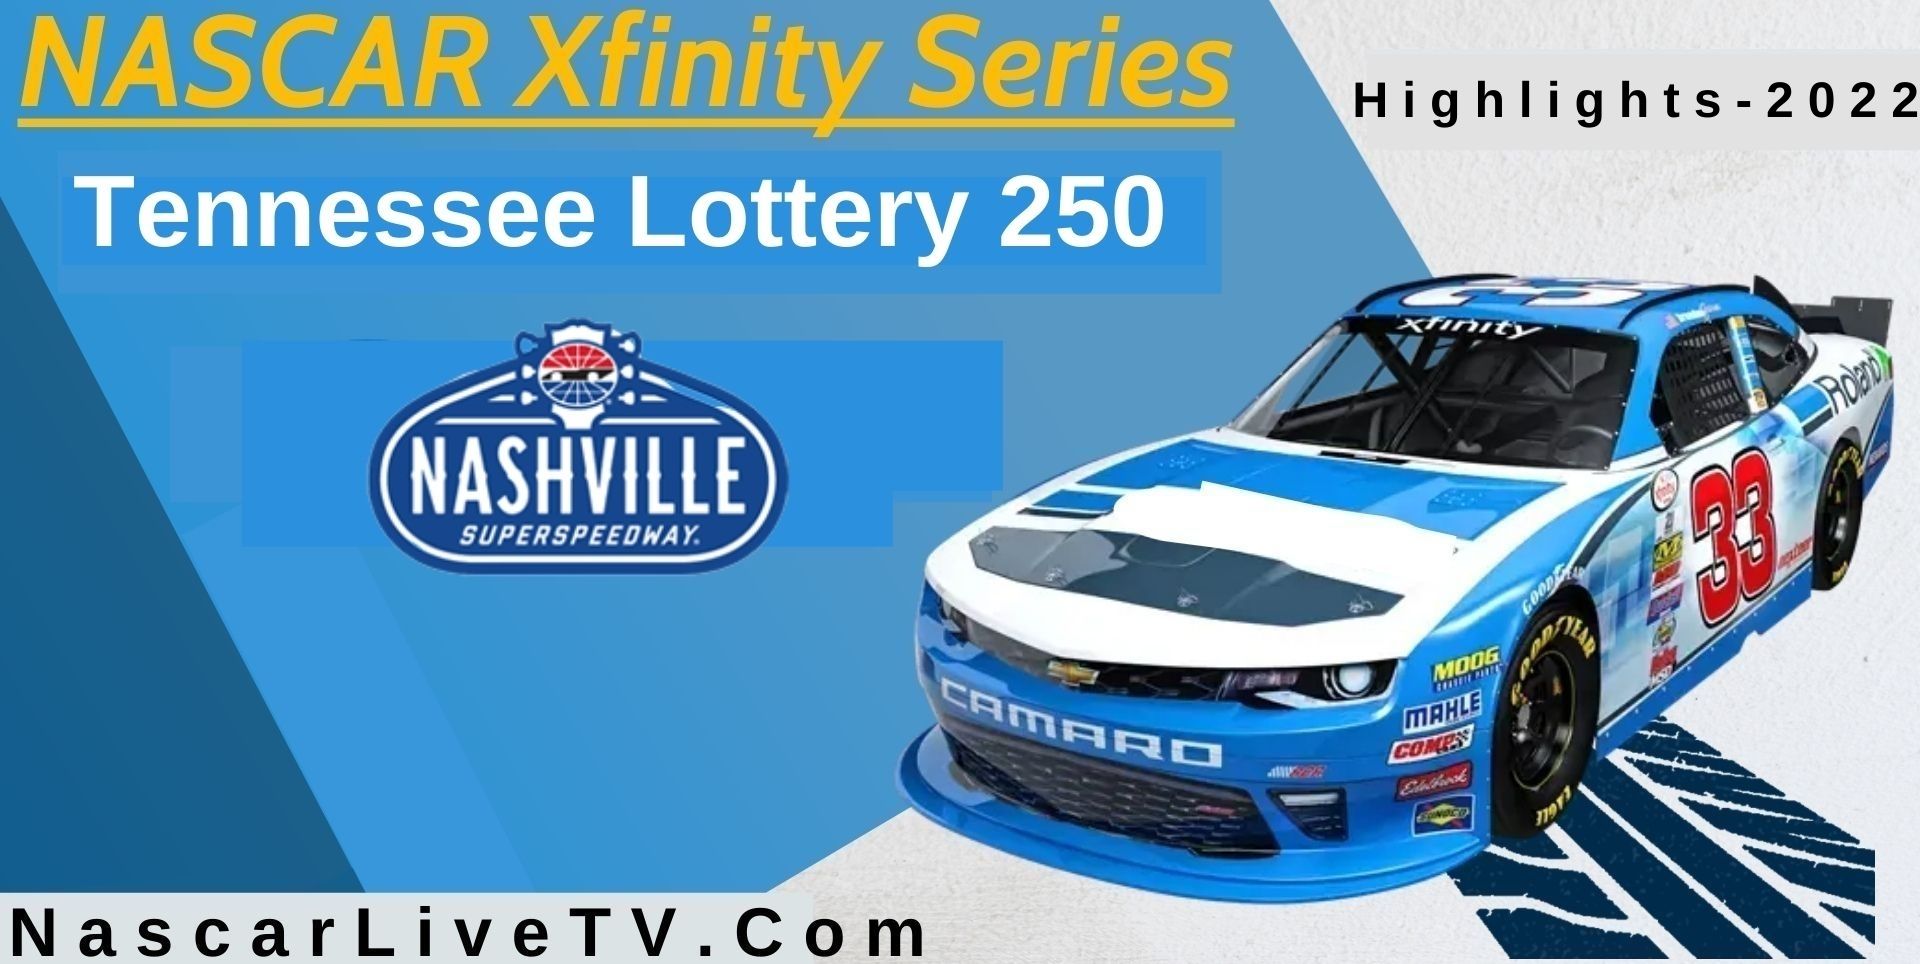 Tennessee Lottery 250 Highlights Nascar Xfinity Series 2022